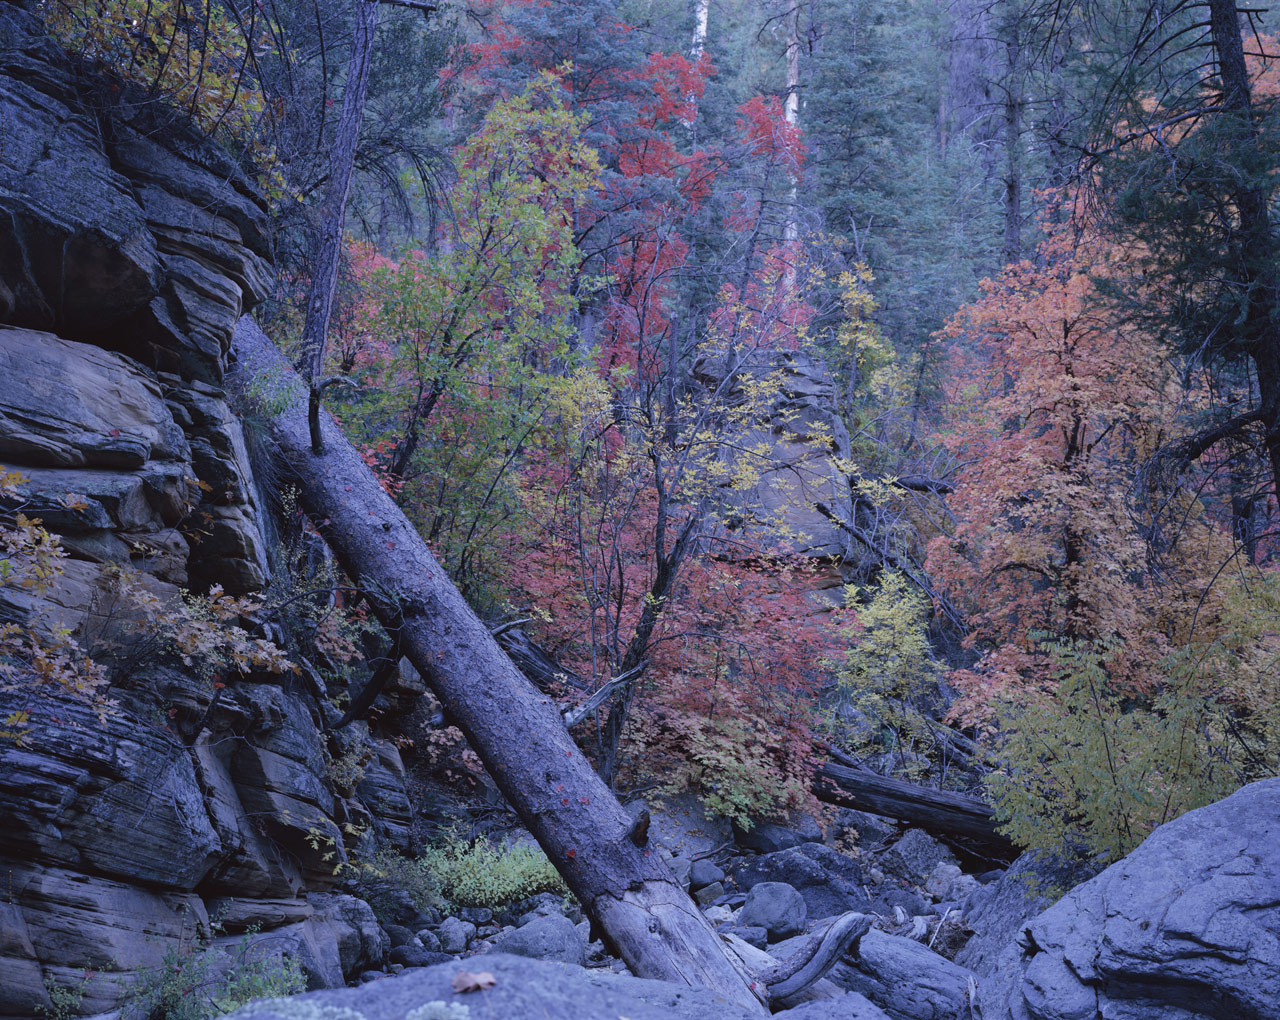 Rocks along the wash bank, dead tree trunks, and orange and red leaves on the Maples near Cave Springs in Oak Creek Canyon